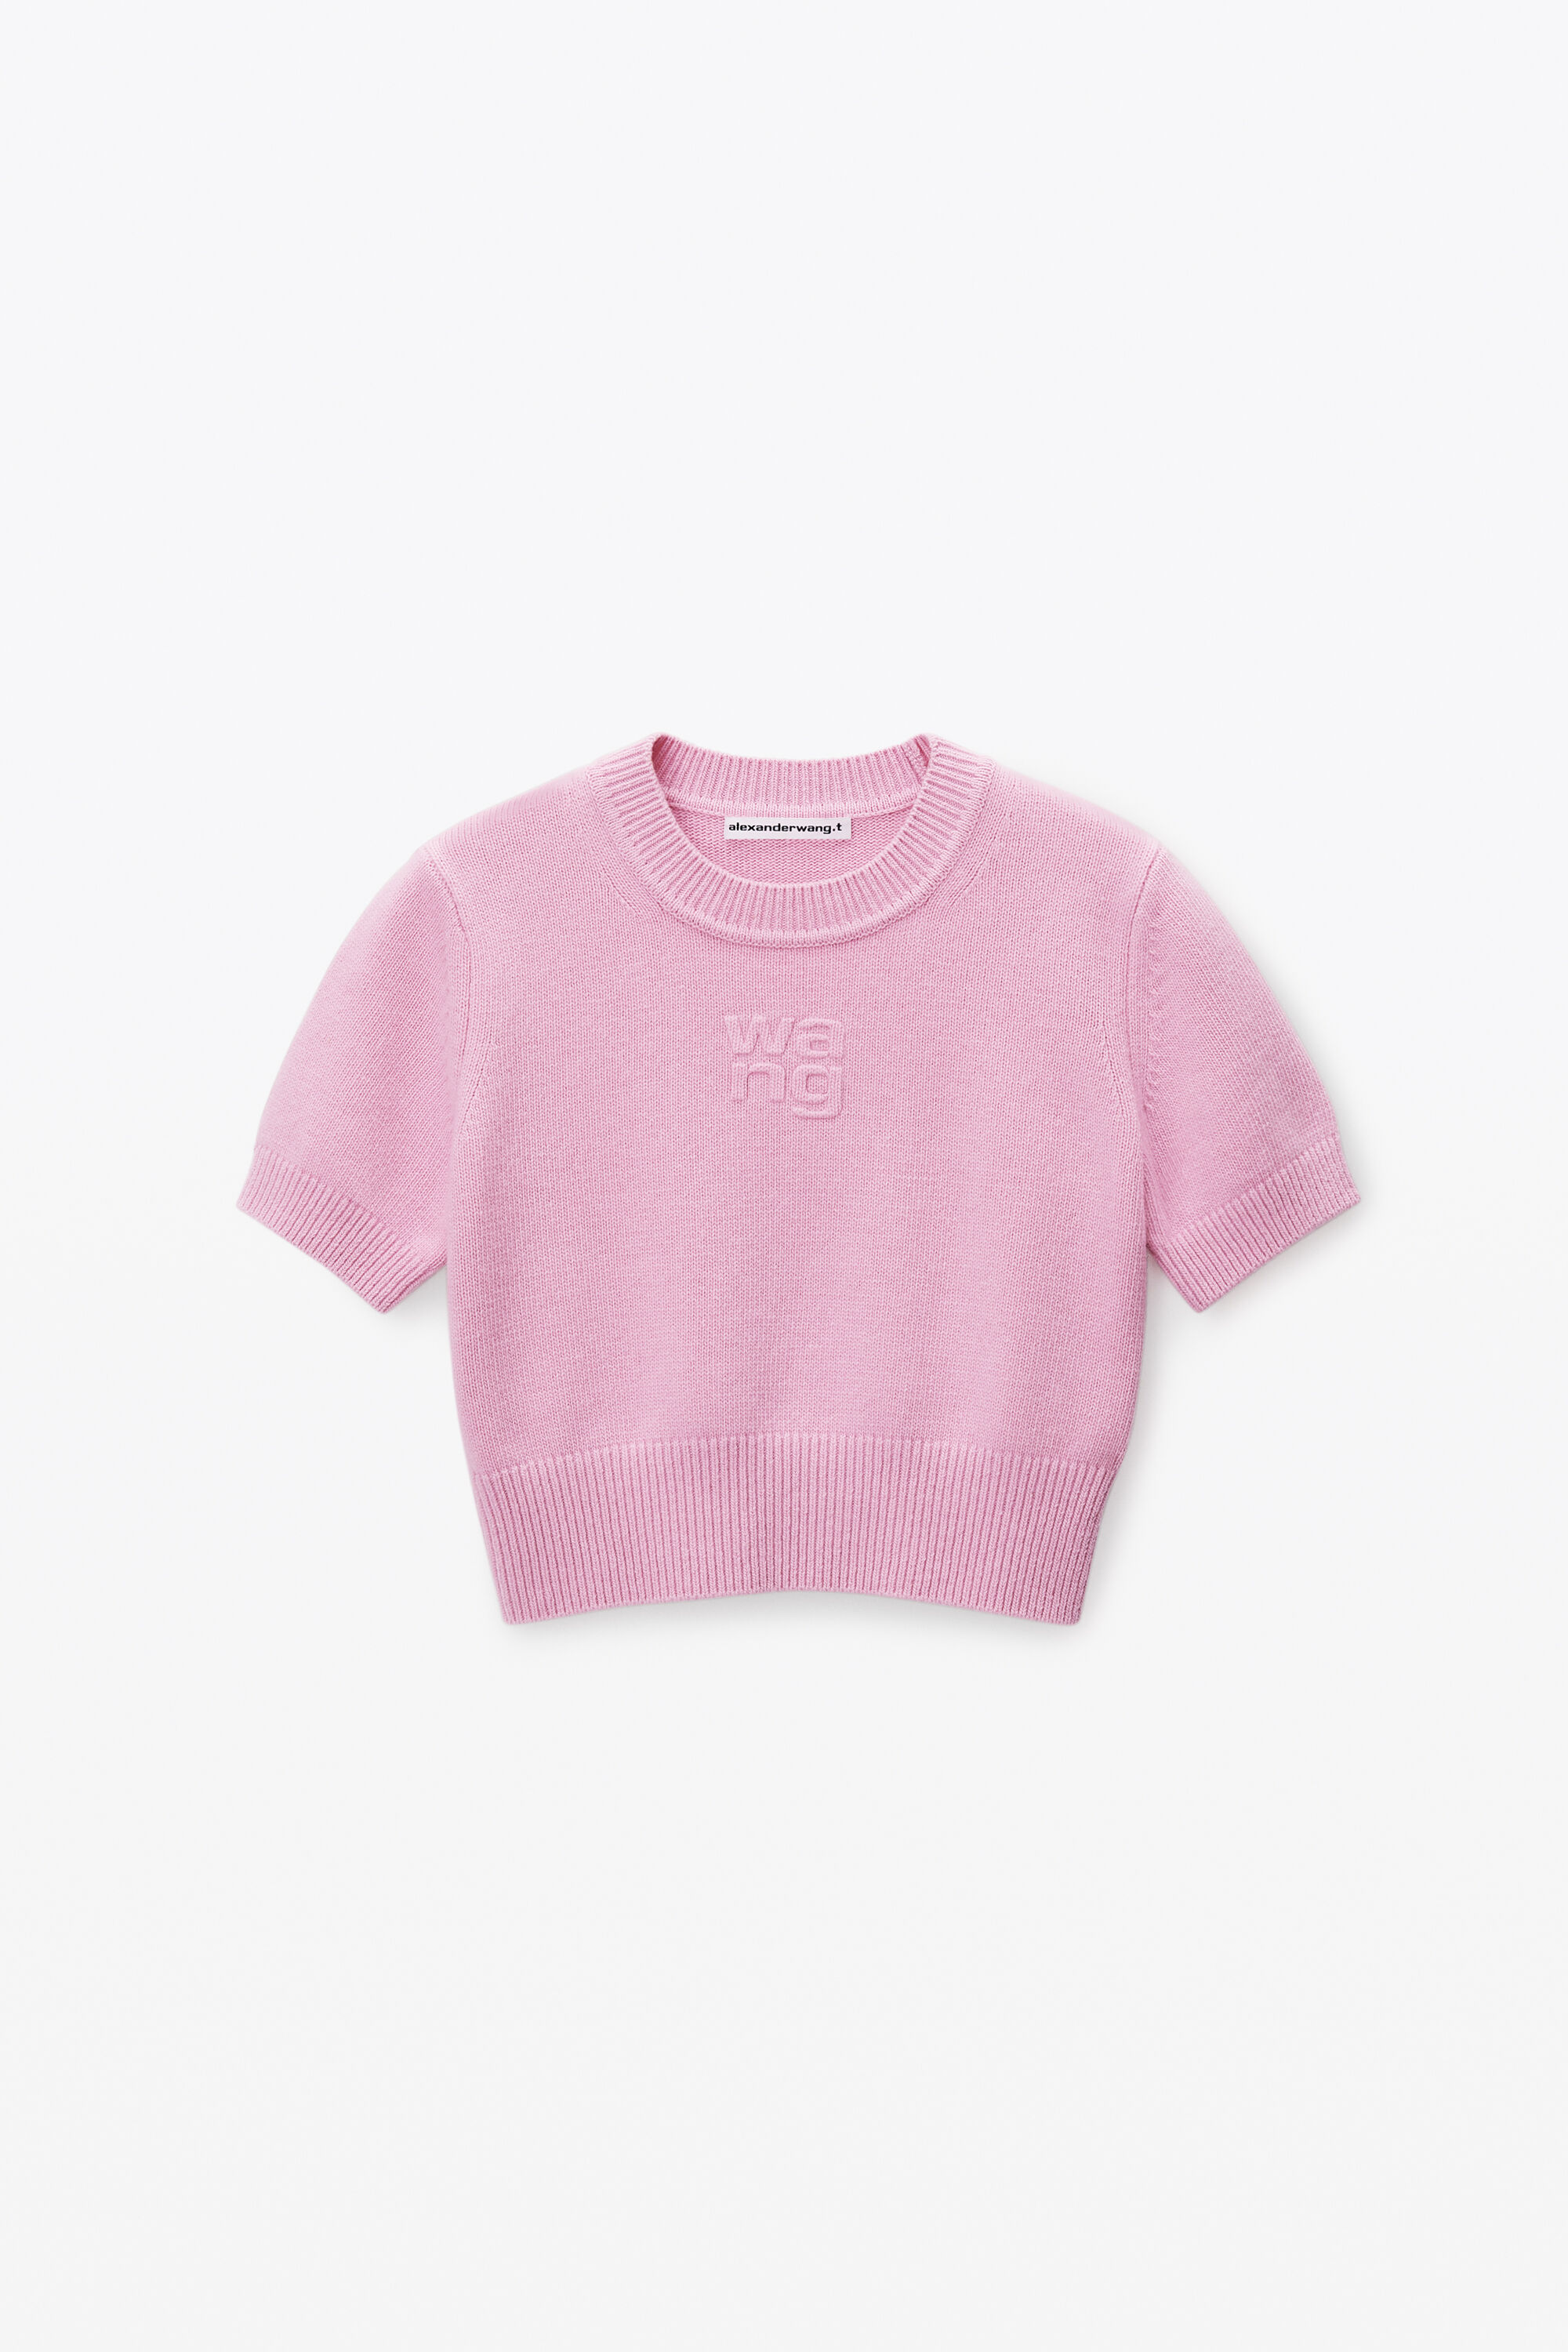 Short Sleeve Cropped Pullover in PINK LAVENDER 